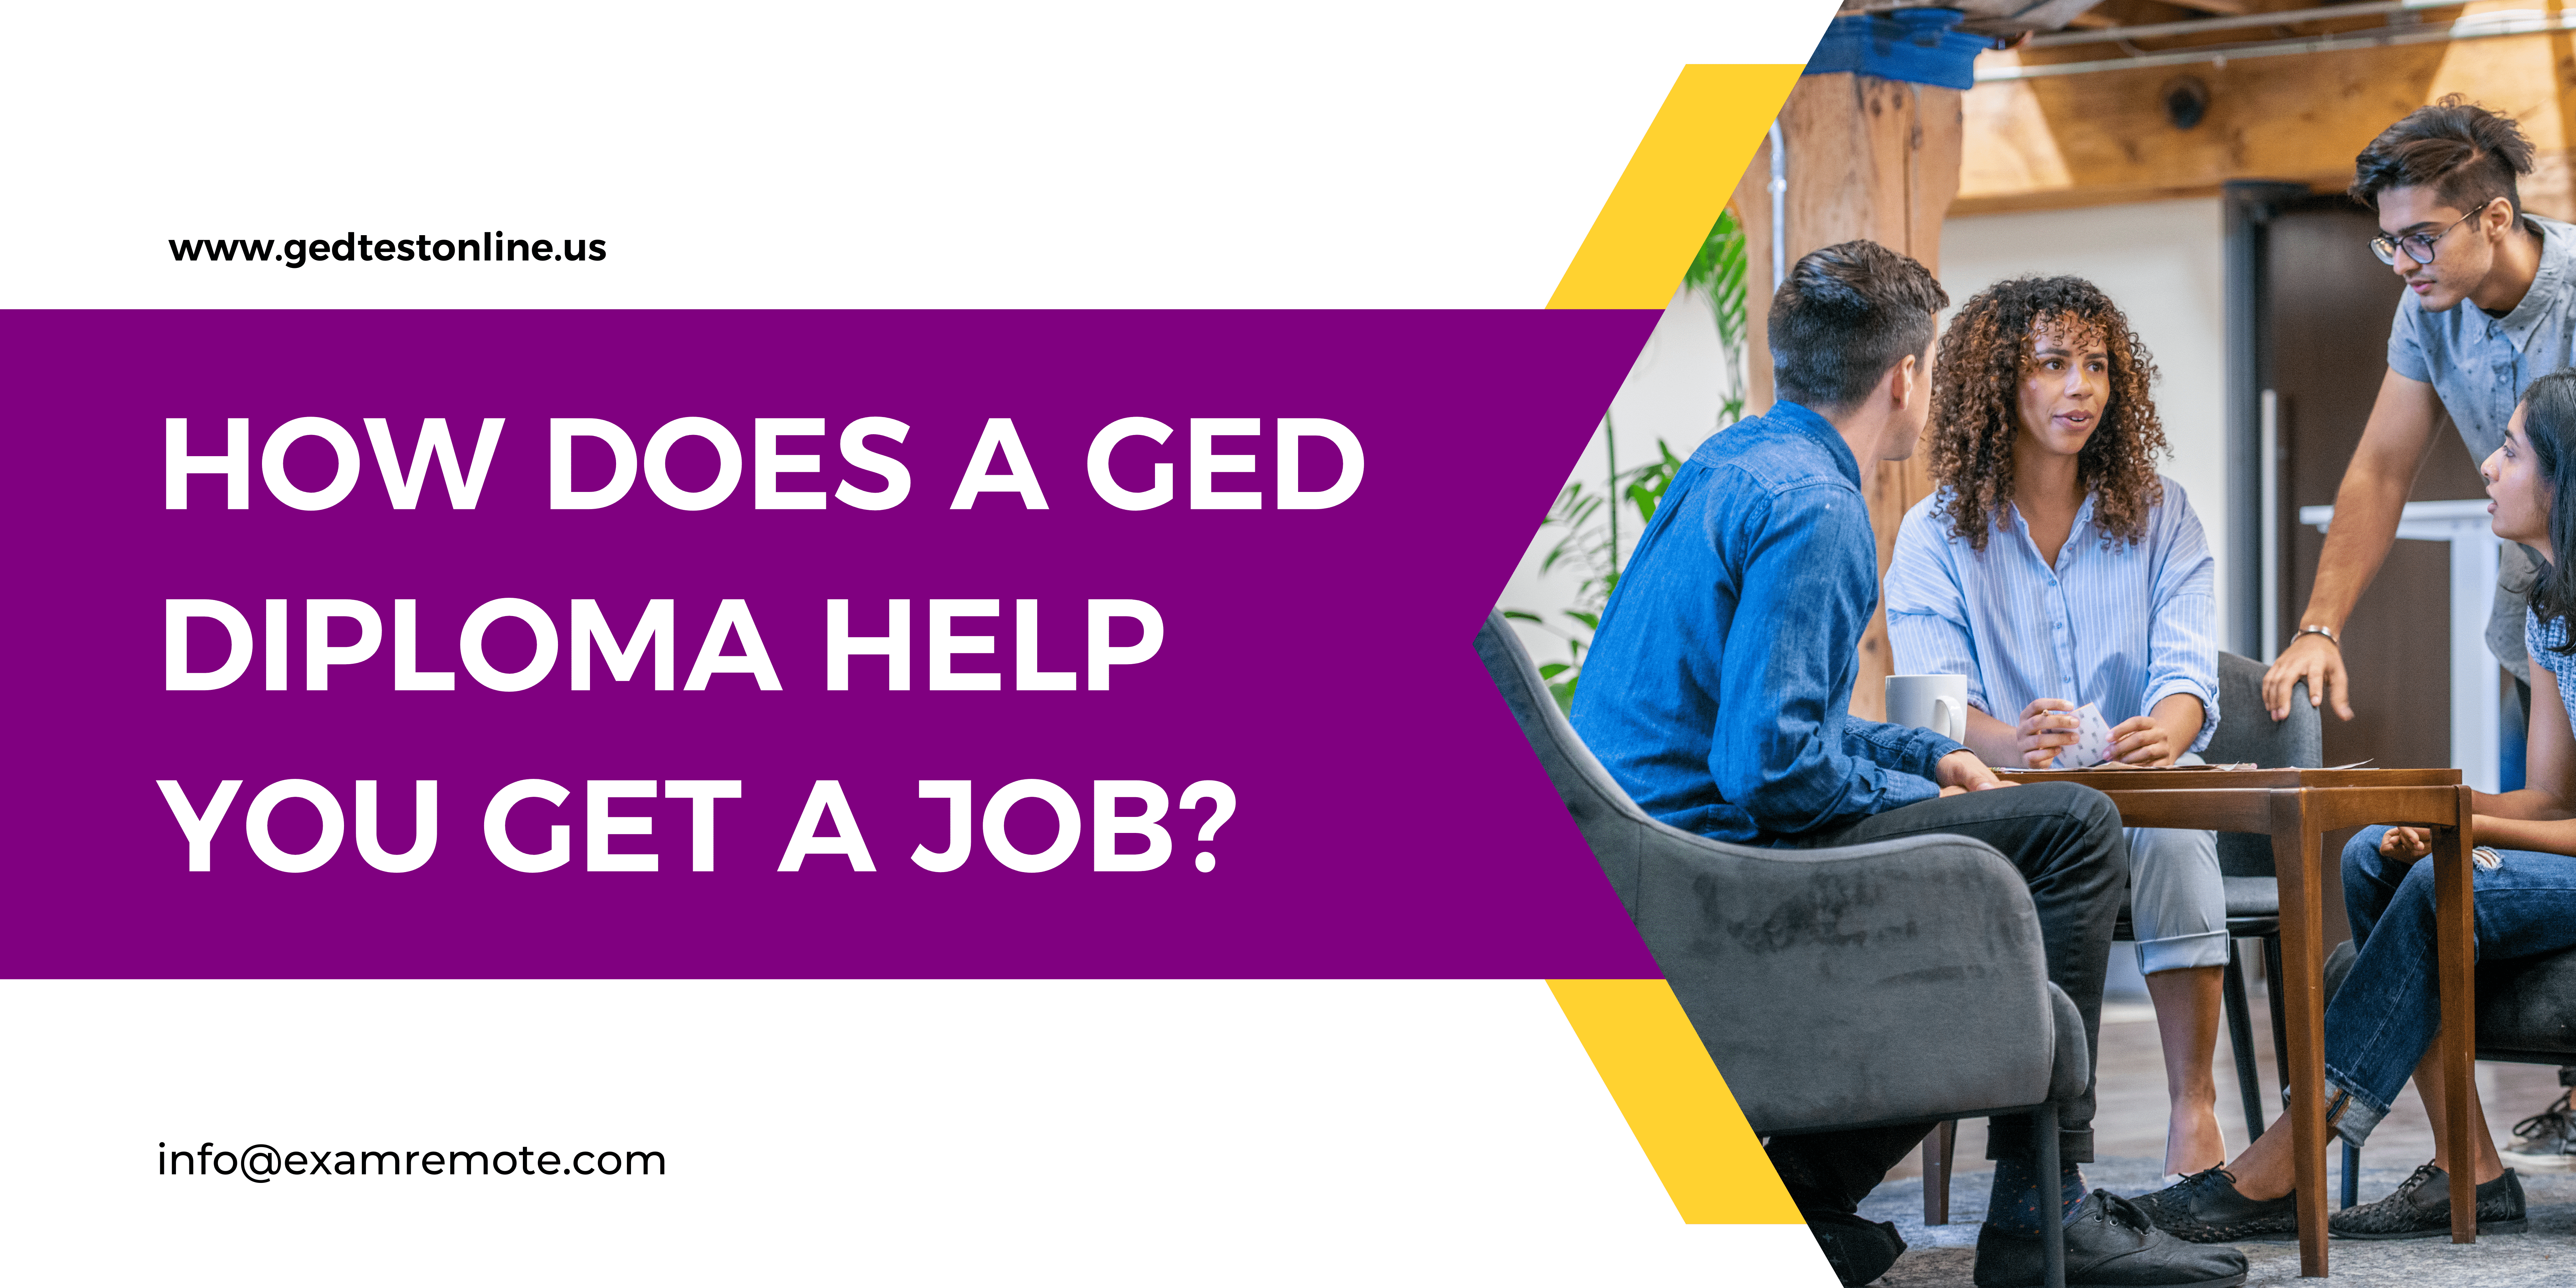 How Does a GED Diploma Help You Get a Job?